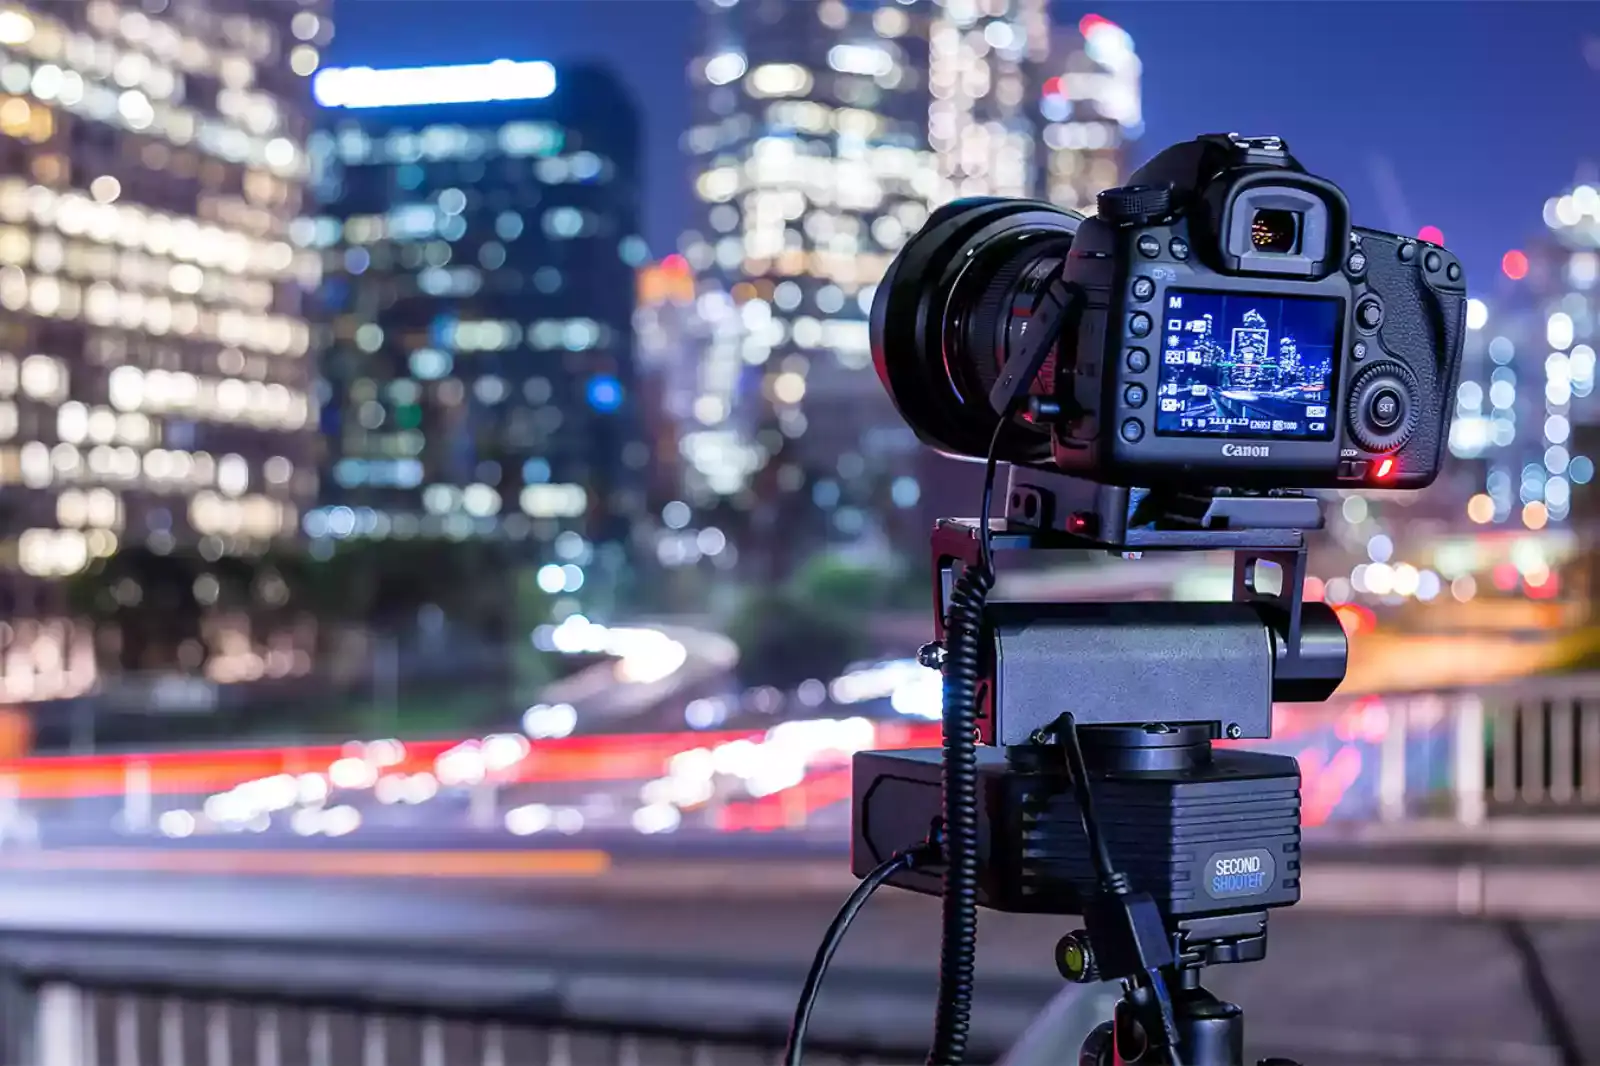 How to Capture a Time-Lapse Using a DSLR Camera